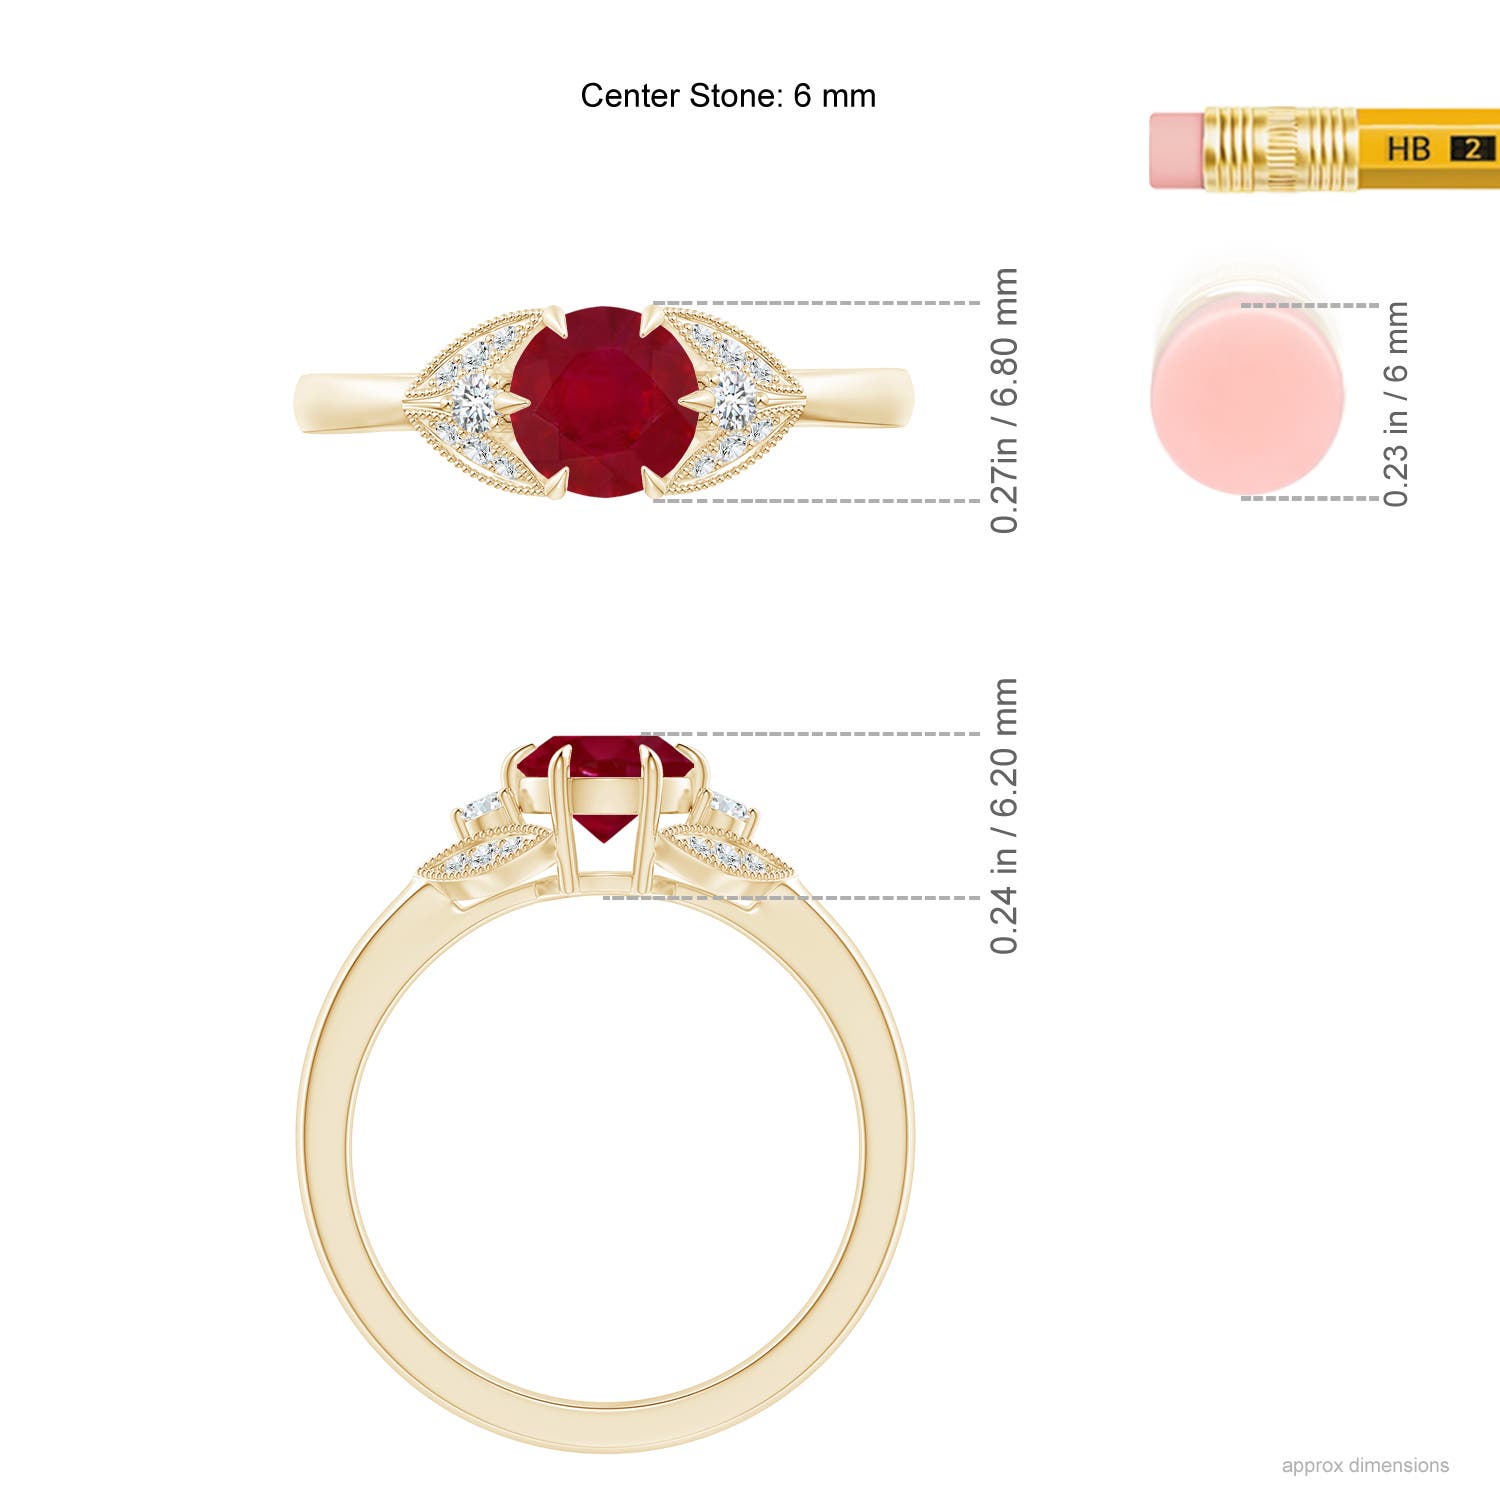 AA - Ruby / 1.1 CT / 14 KT Yellow Gold